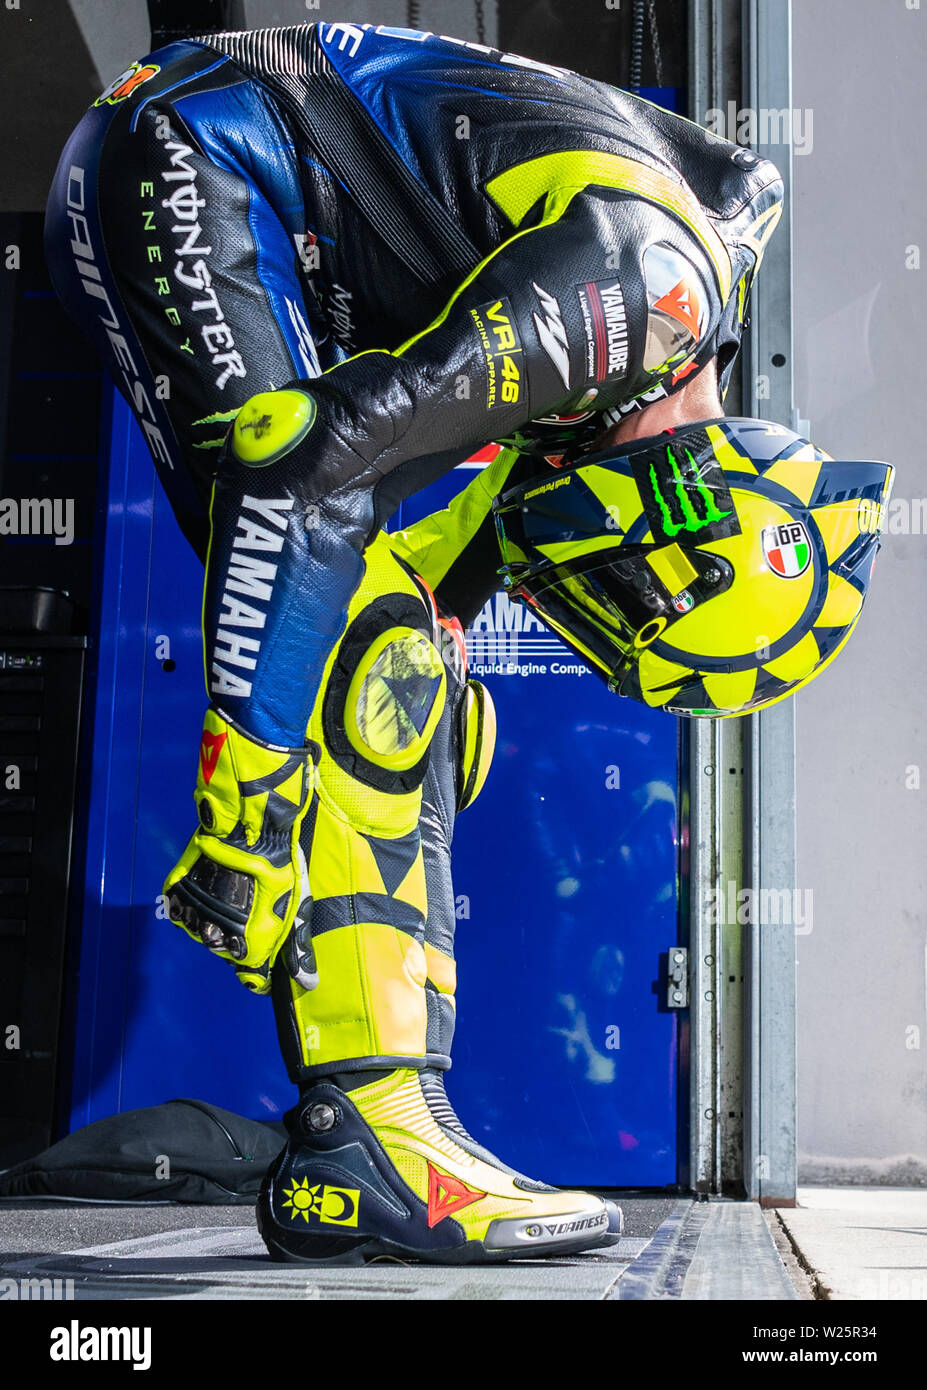 Hohenstein Ernstthal, Germany. . 06th July, 2019. Motorcycle, Grand Prix of  Germany, 3rd free practice MotoGP at the Sachsenring: Rider Valentino Rossi  (Italy, Monster Energy Yamaha MotoGP Team) stretches before leaving his